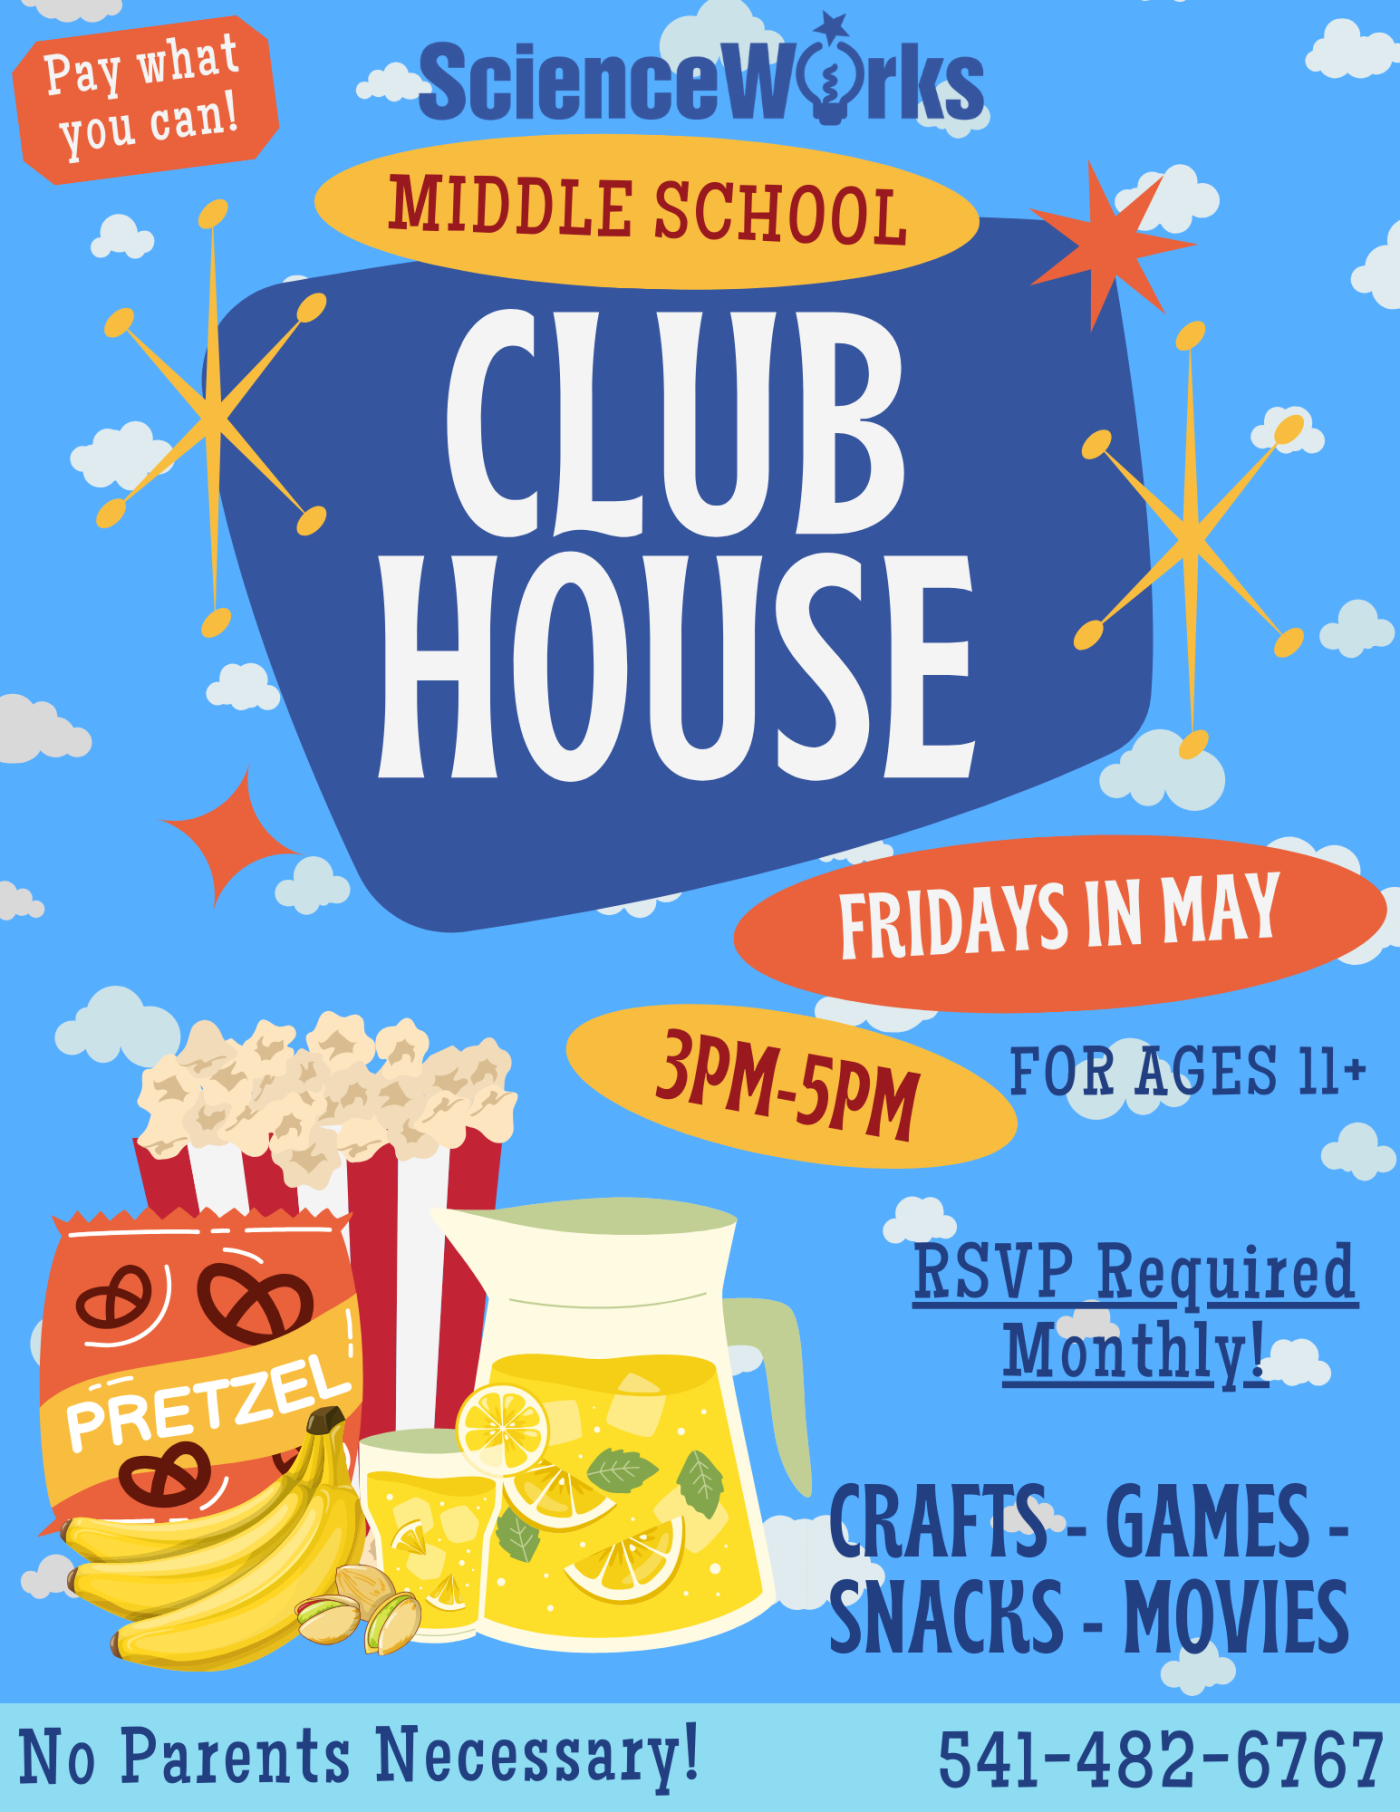 Middle School Club House in May. Friday May 3, 10, 17, 24, 31. 3 - 5 pm